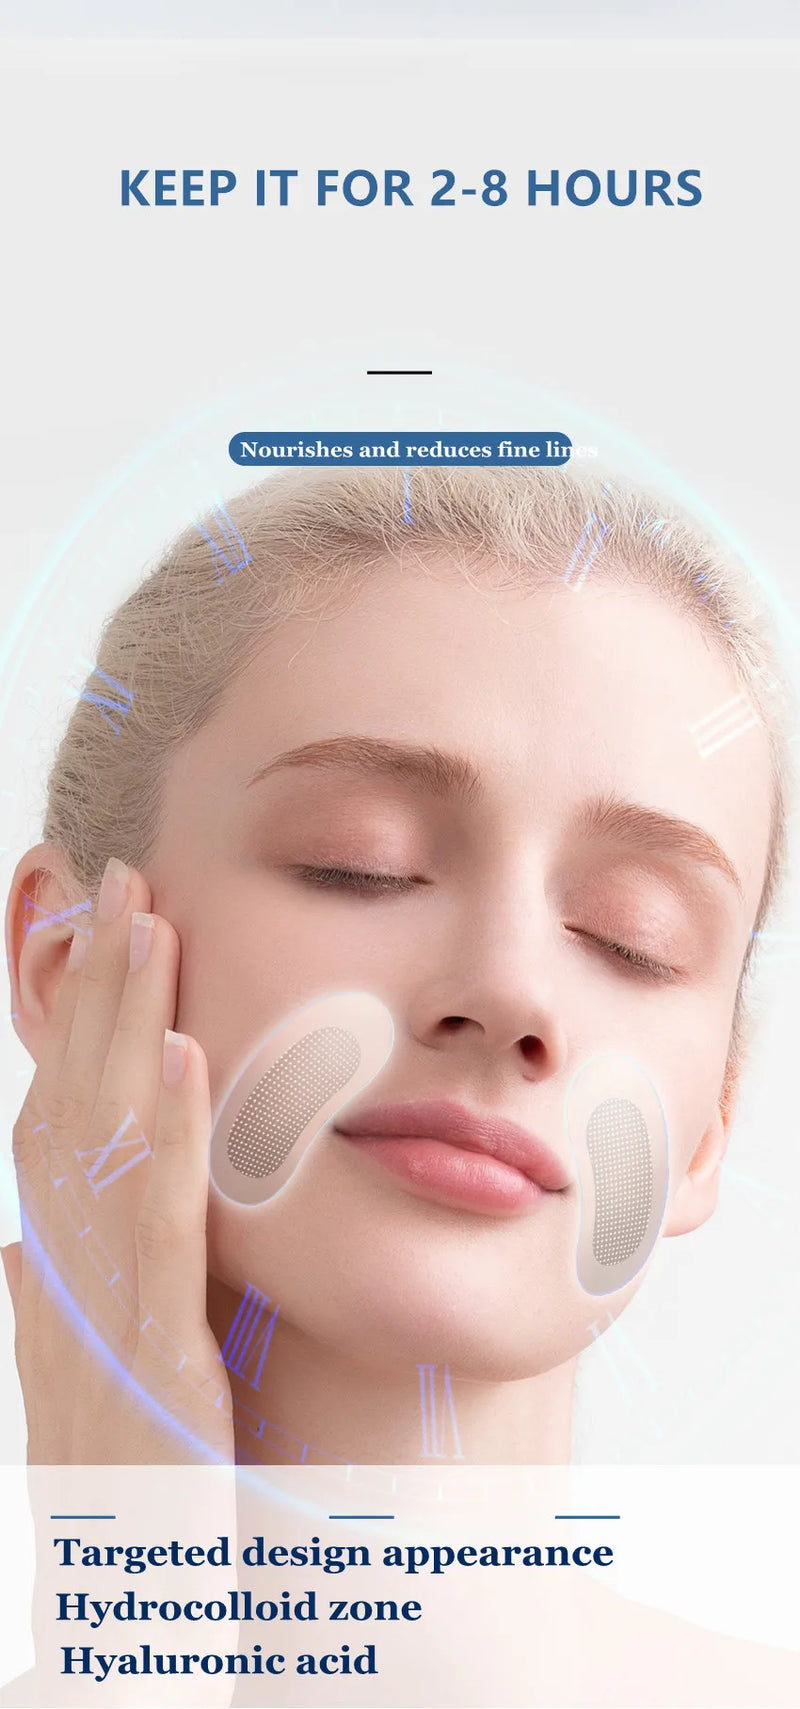 2 Pairs Micro-needle Nasolabial Folds Patches With Hyaluronic Acid